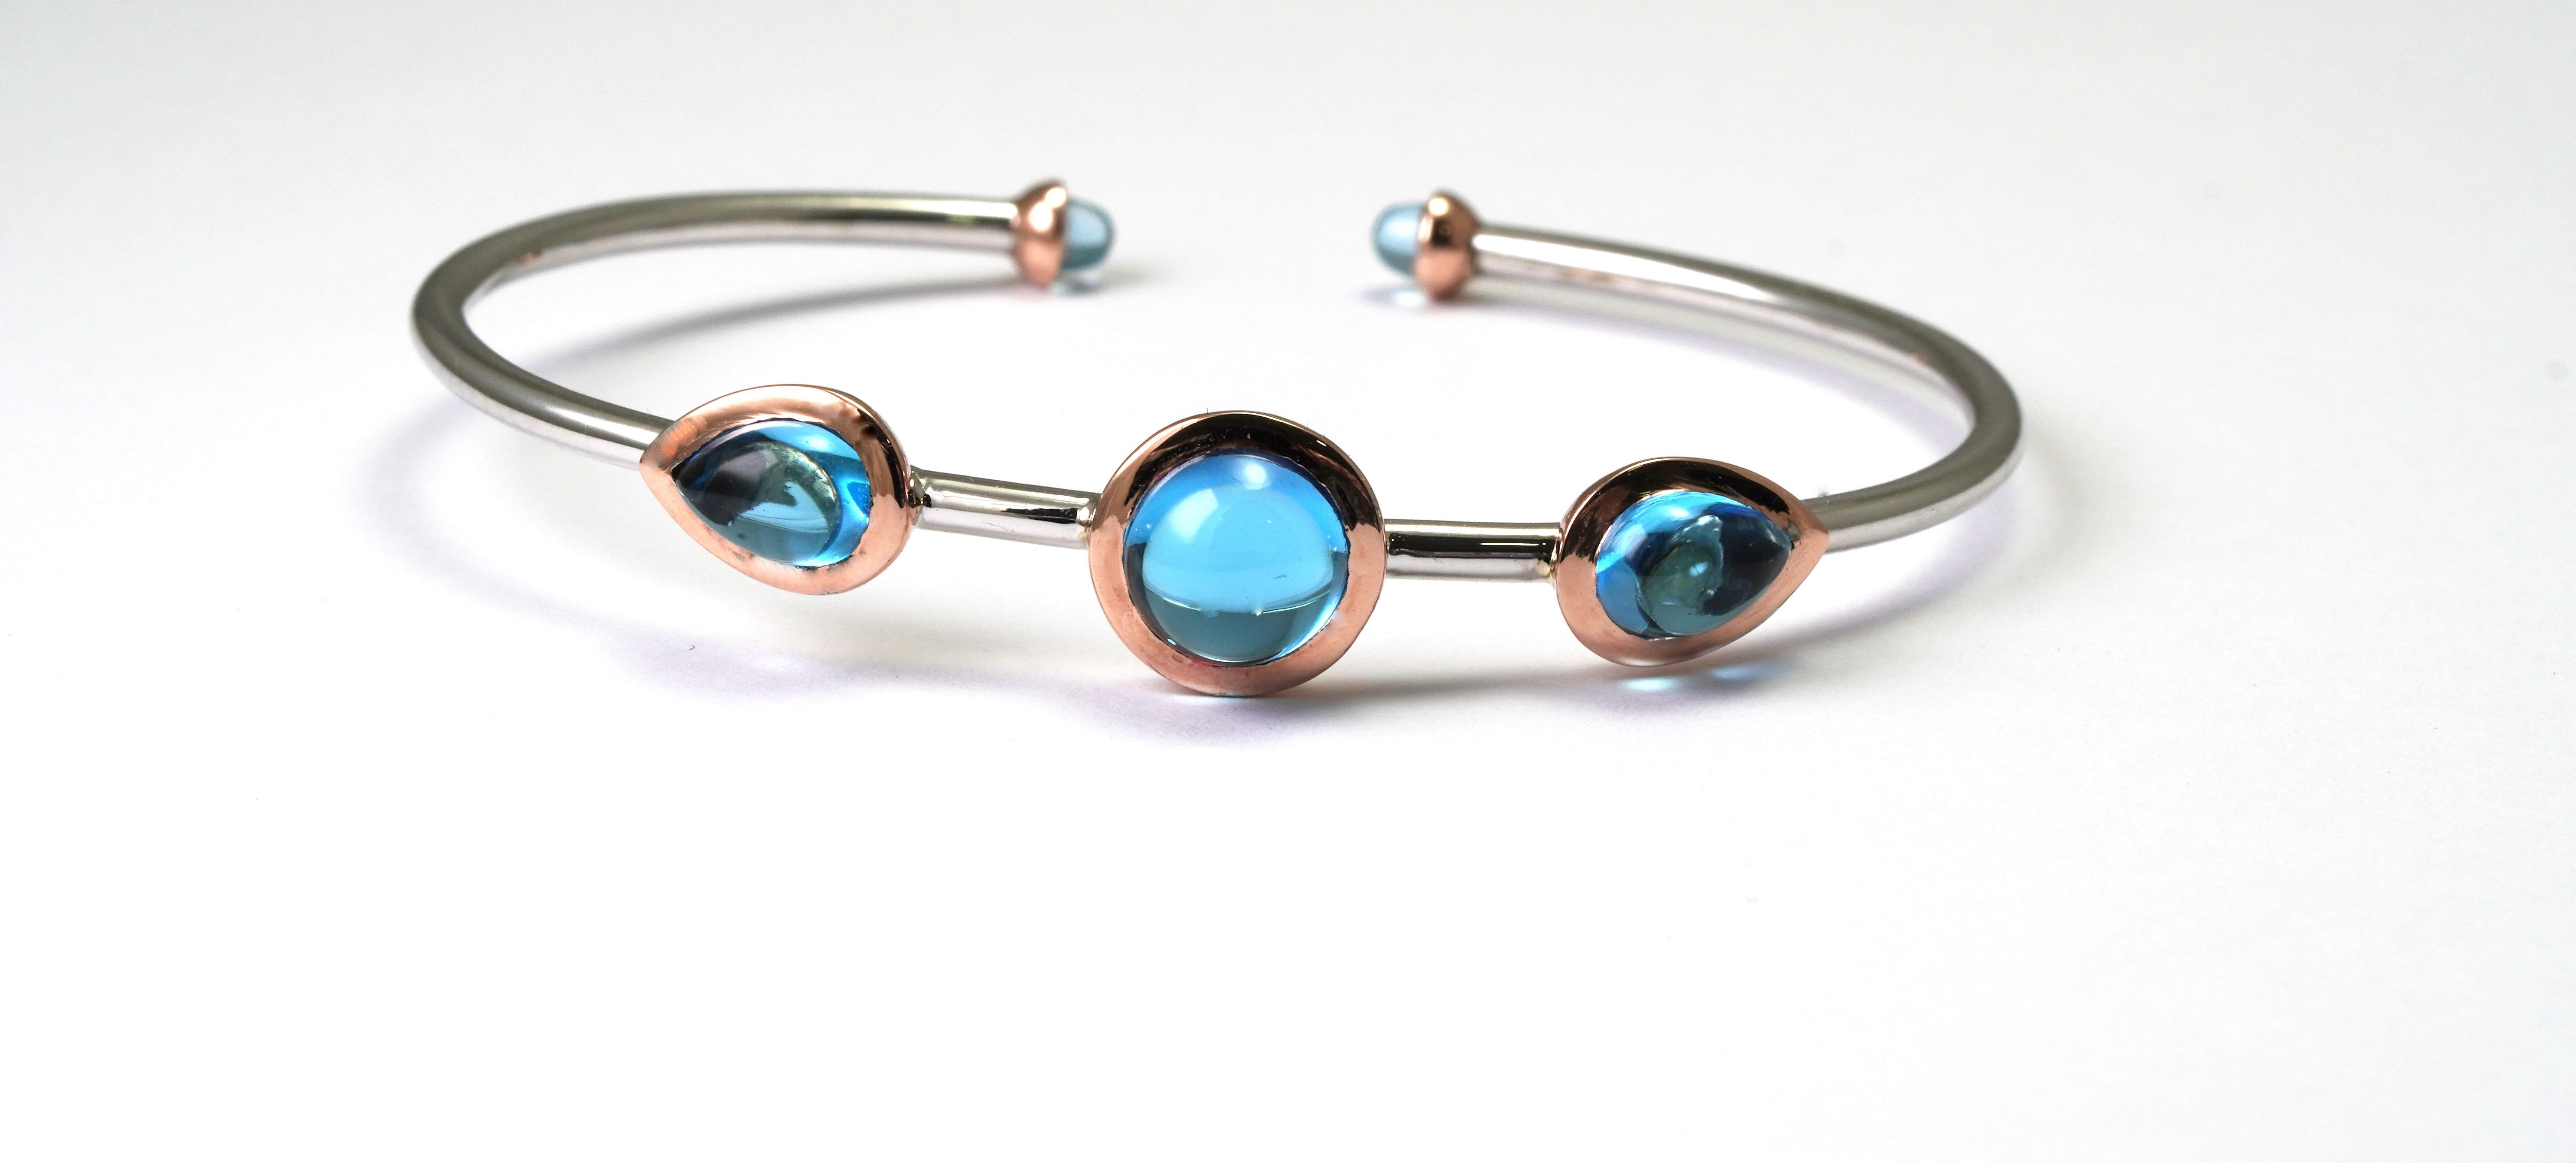 14 ct. White and Rose Gold Bracelet set with Swiss Blue Topaz.
Gold color: White and Rose
Dimensions: 53mm. x 41mm. 
Total weight: 5.94 grams 

Set with:
- Topaz (5 pieces)
Cut: Cabochon
Total Weight: 6.22 Carat
Color: Swiss Blue